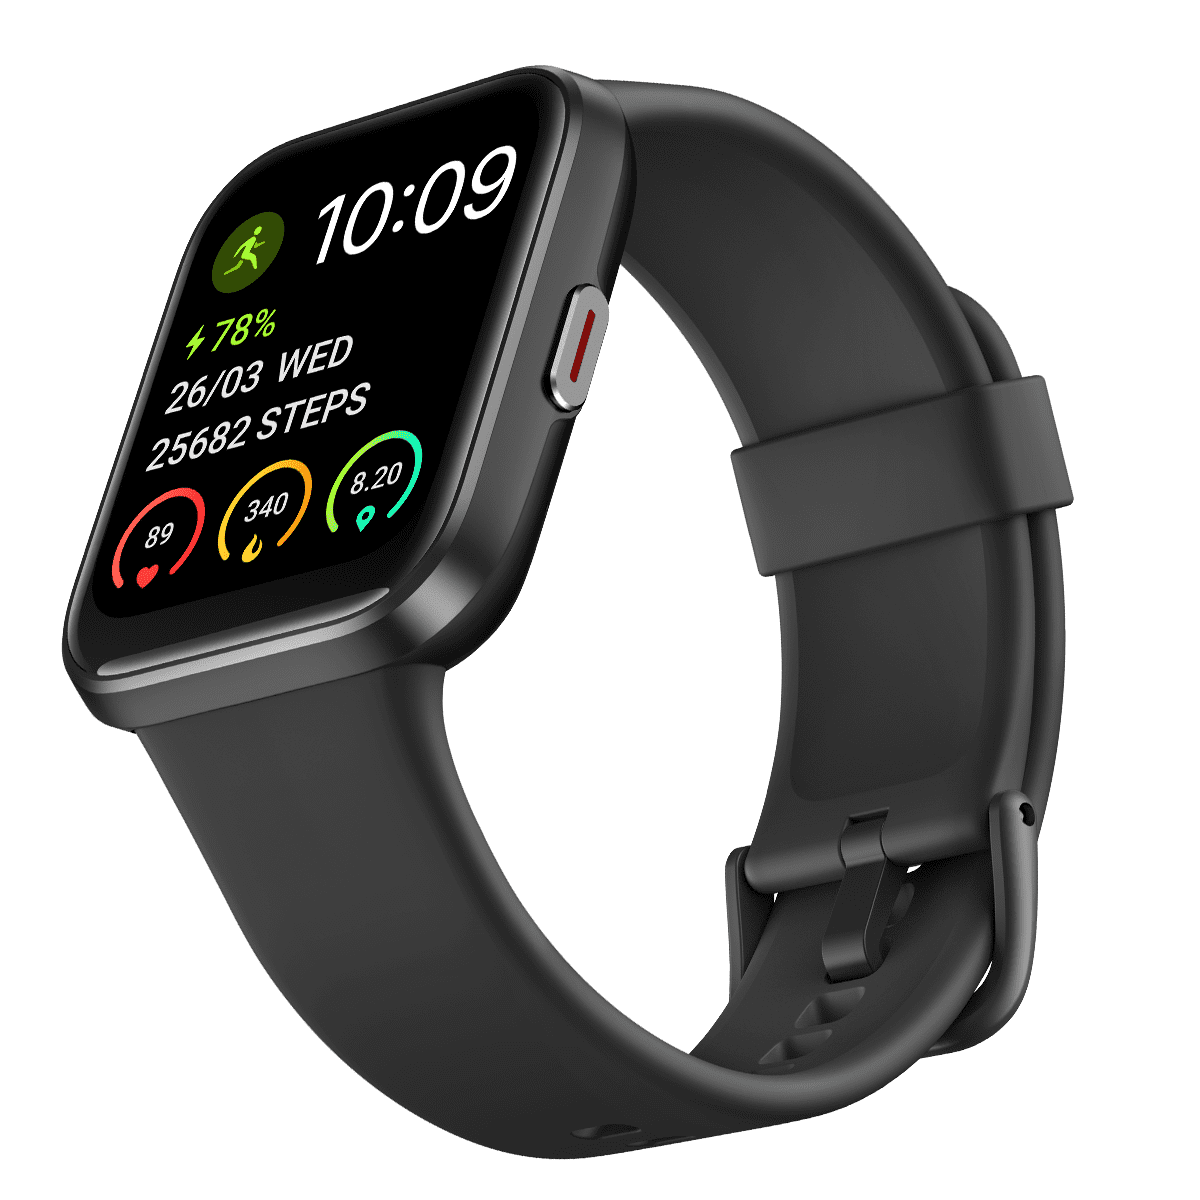  Xiaomi Watch S1 Active 1.43 AMOLED Display 117 Fitness Modes  19 Professional Modes, 200+ Watch Faces, Exquisite Metal Bezel